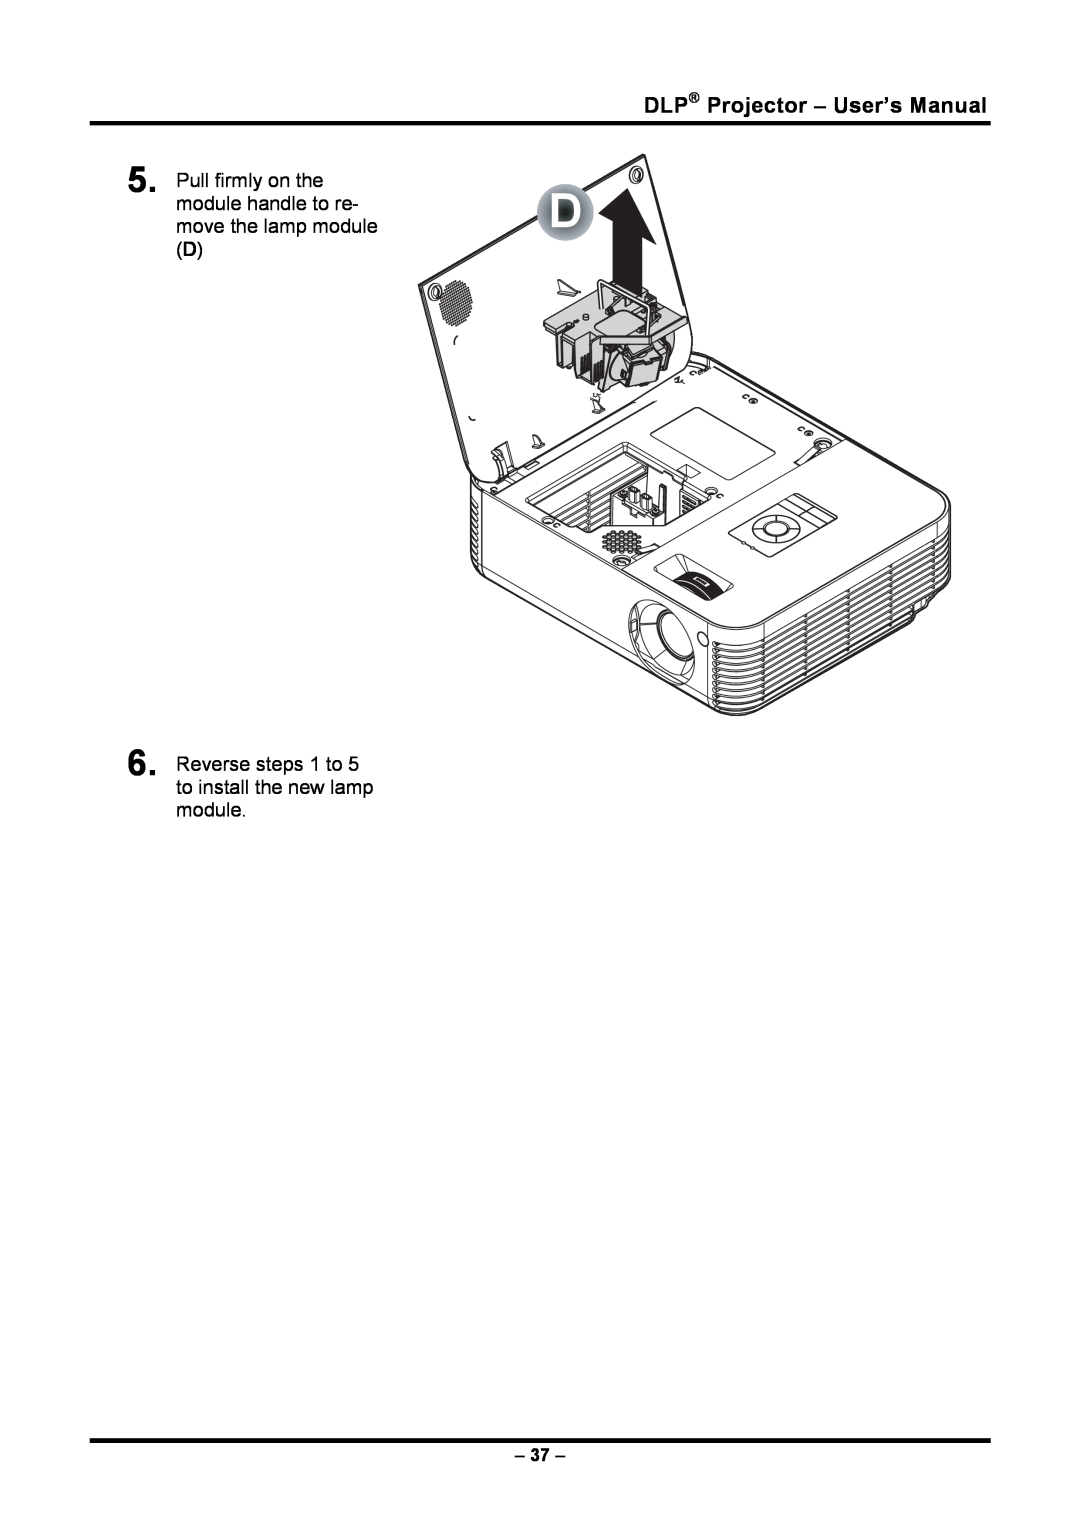 Planar PR5030 manual DLP Projector - User’s Manual, Pull firmly on the module handle to re- move the lamp module D 